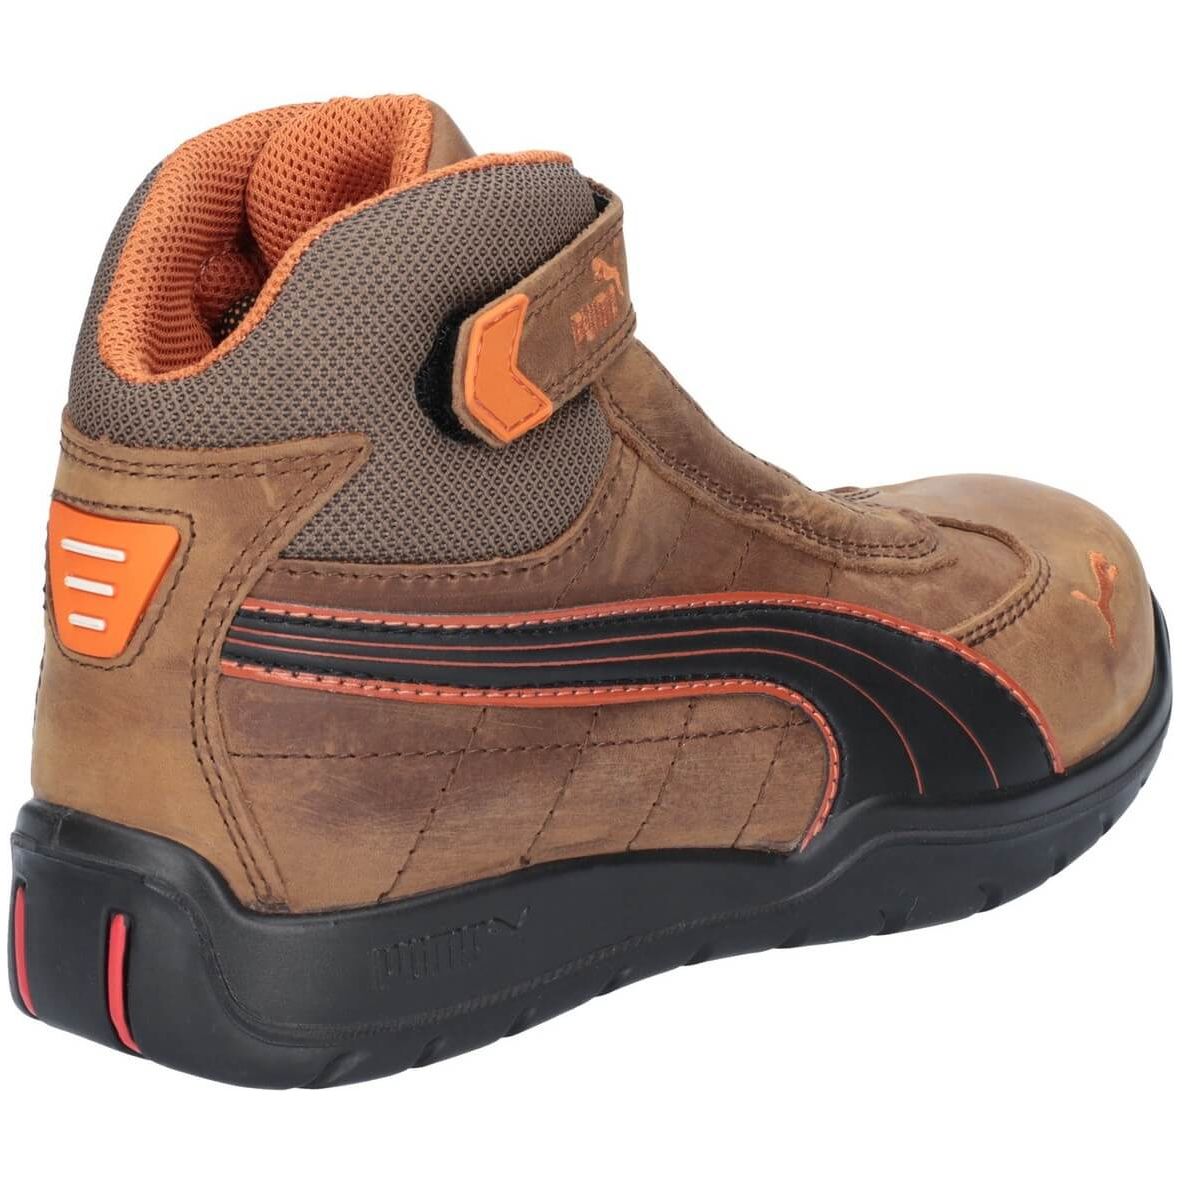 Puma Indy Touch-Fastening Safety Boots-Brown-2